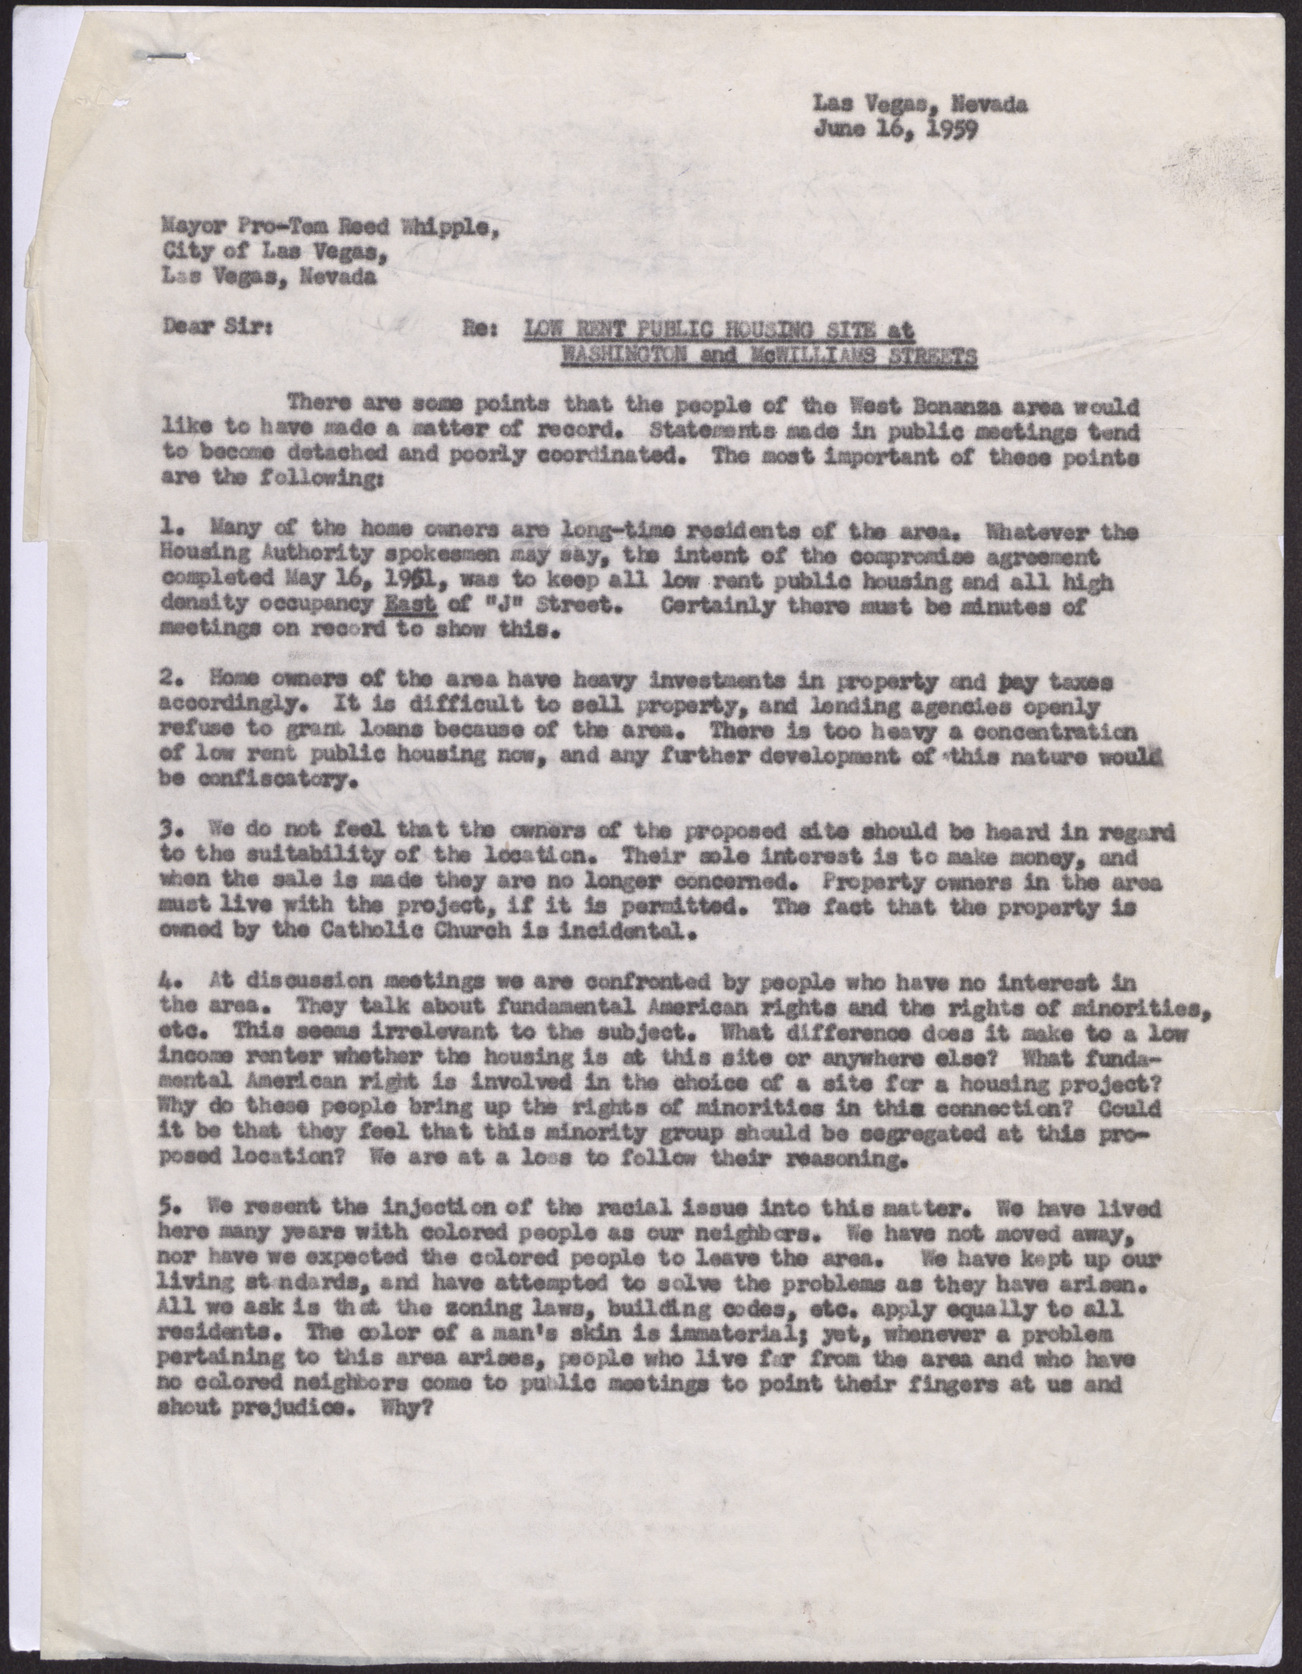 Response from the Bonanza Home Owners' Association regarding a "Low rent public housing site at Washington and McWilliams Streets" proposal, June 16, 1959